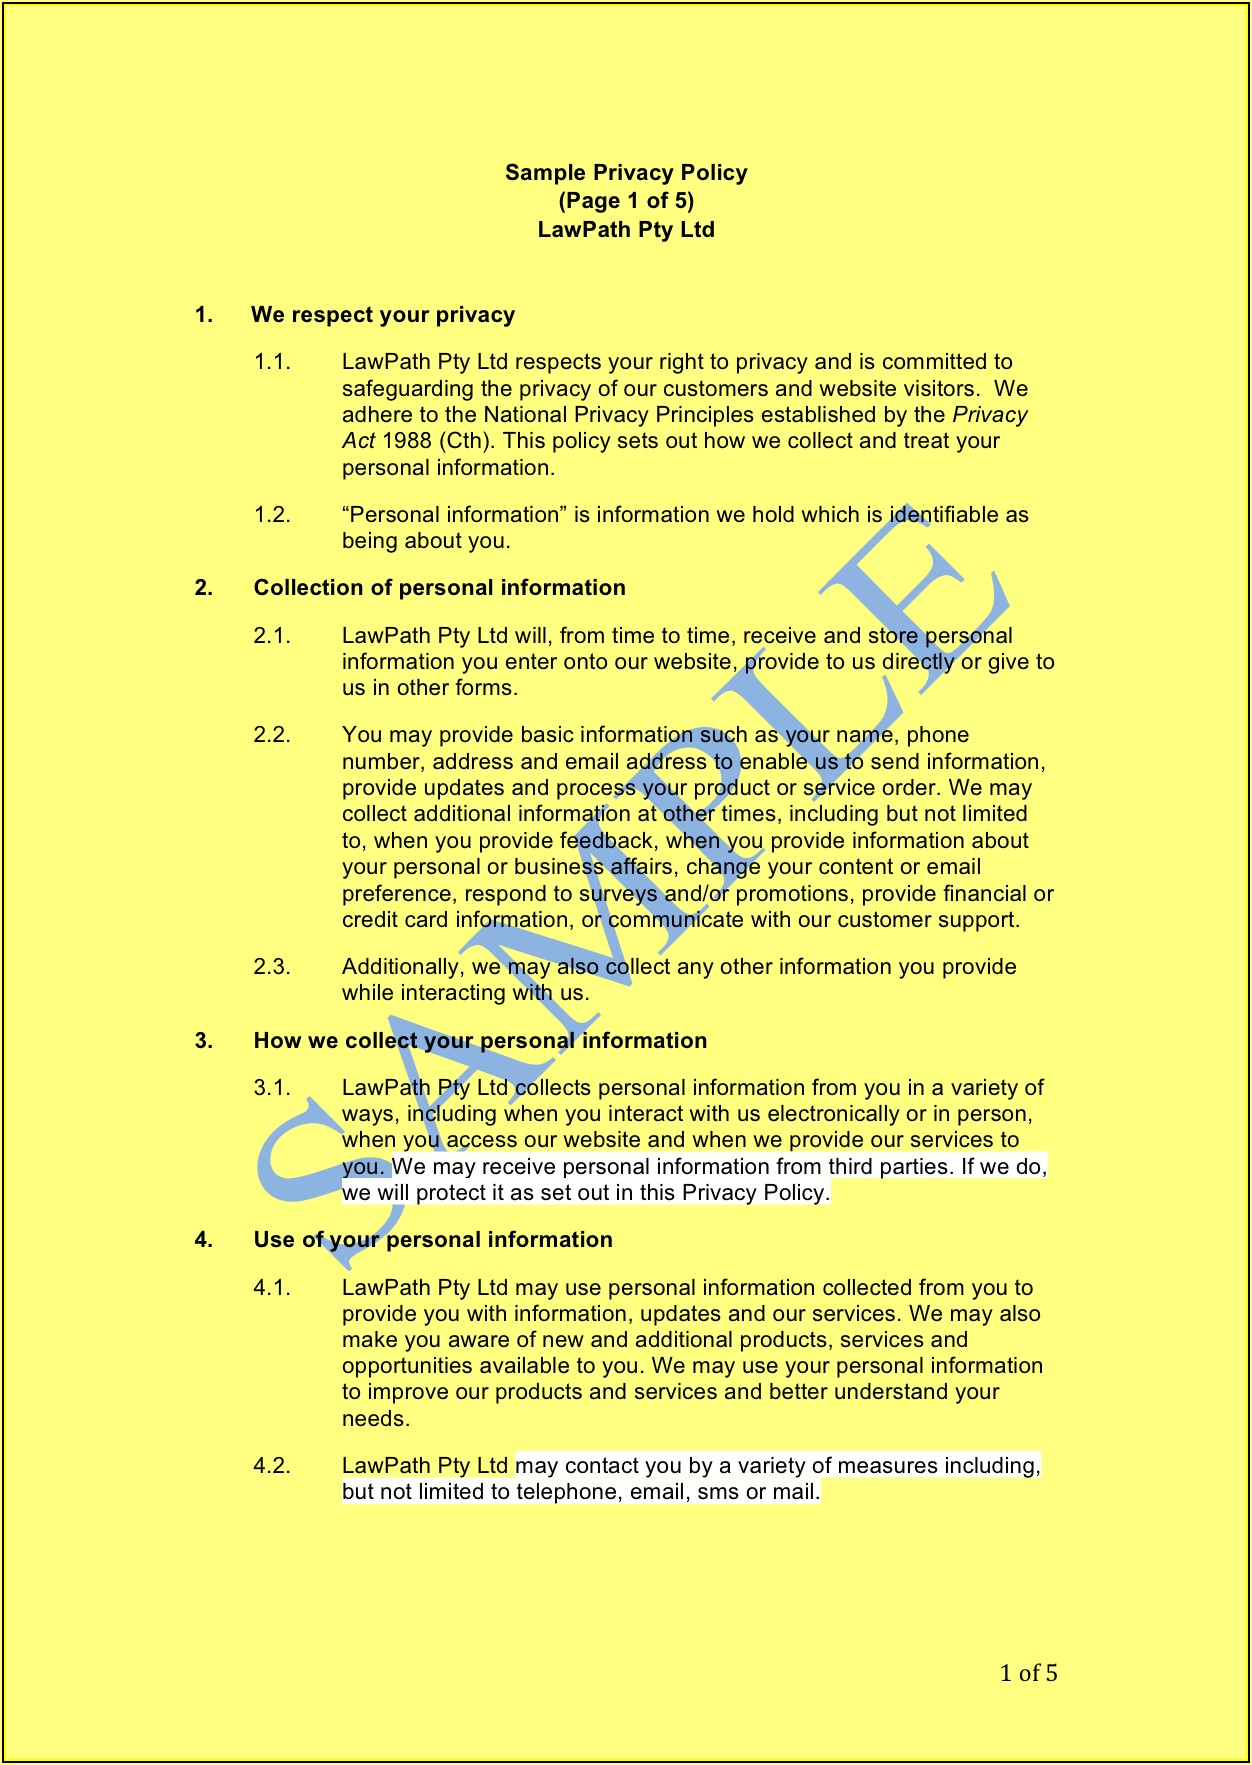 Free Sublease Agreement Template Word Australia